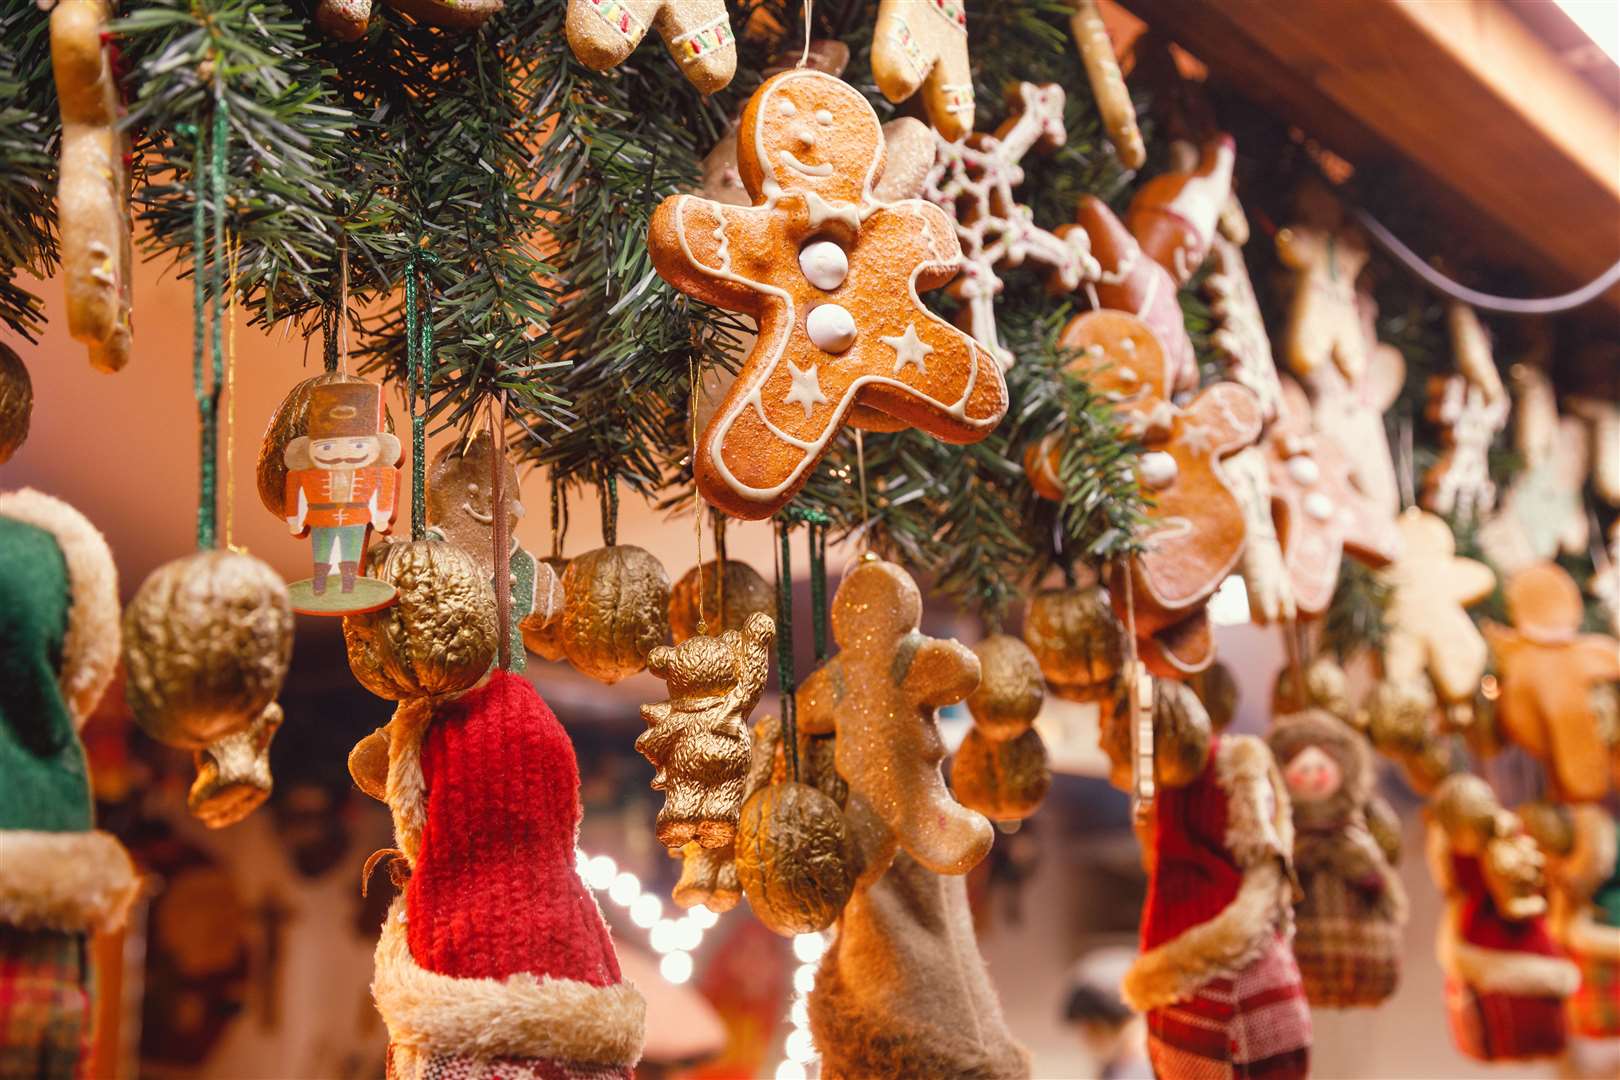 It is hoped the Christmas fair will spread some cheer in what has been a bleak year. Picture: Adobe Stock Images